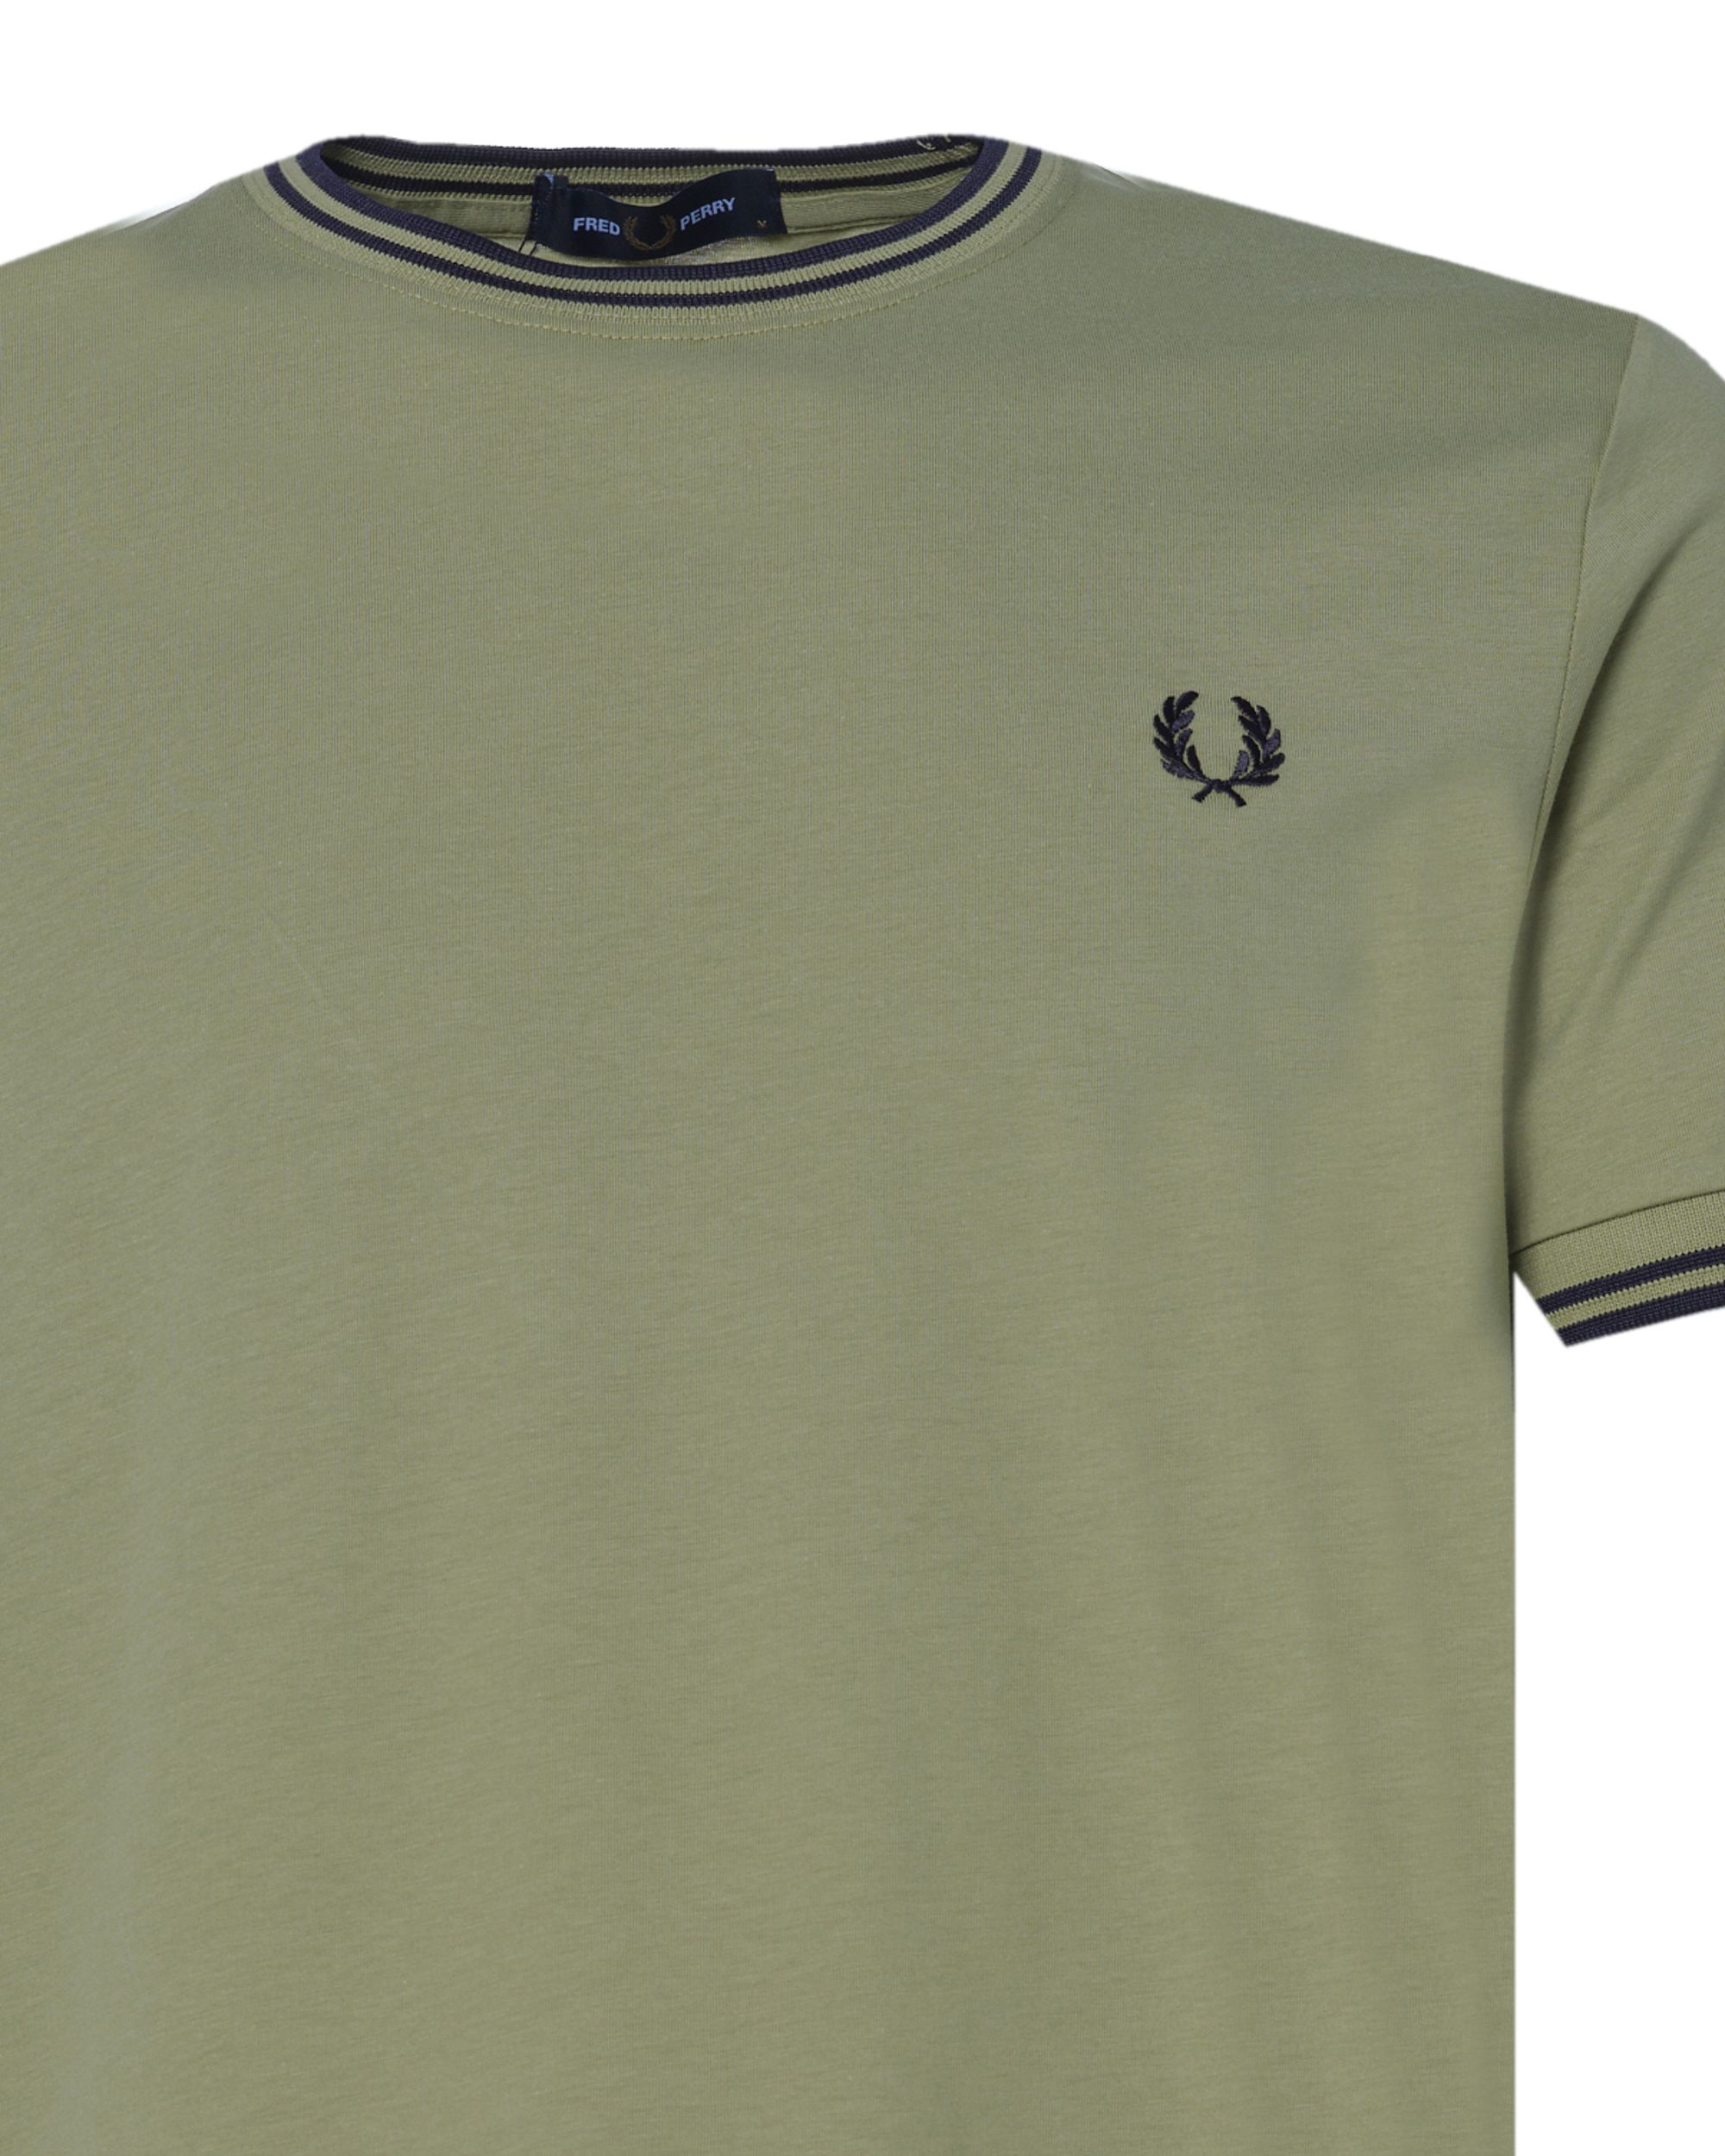 Fred Perry Twin Tipped T-shirt KM Groen 078790-003-L